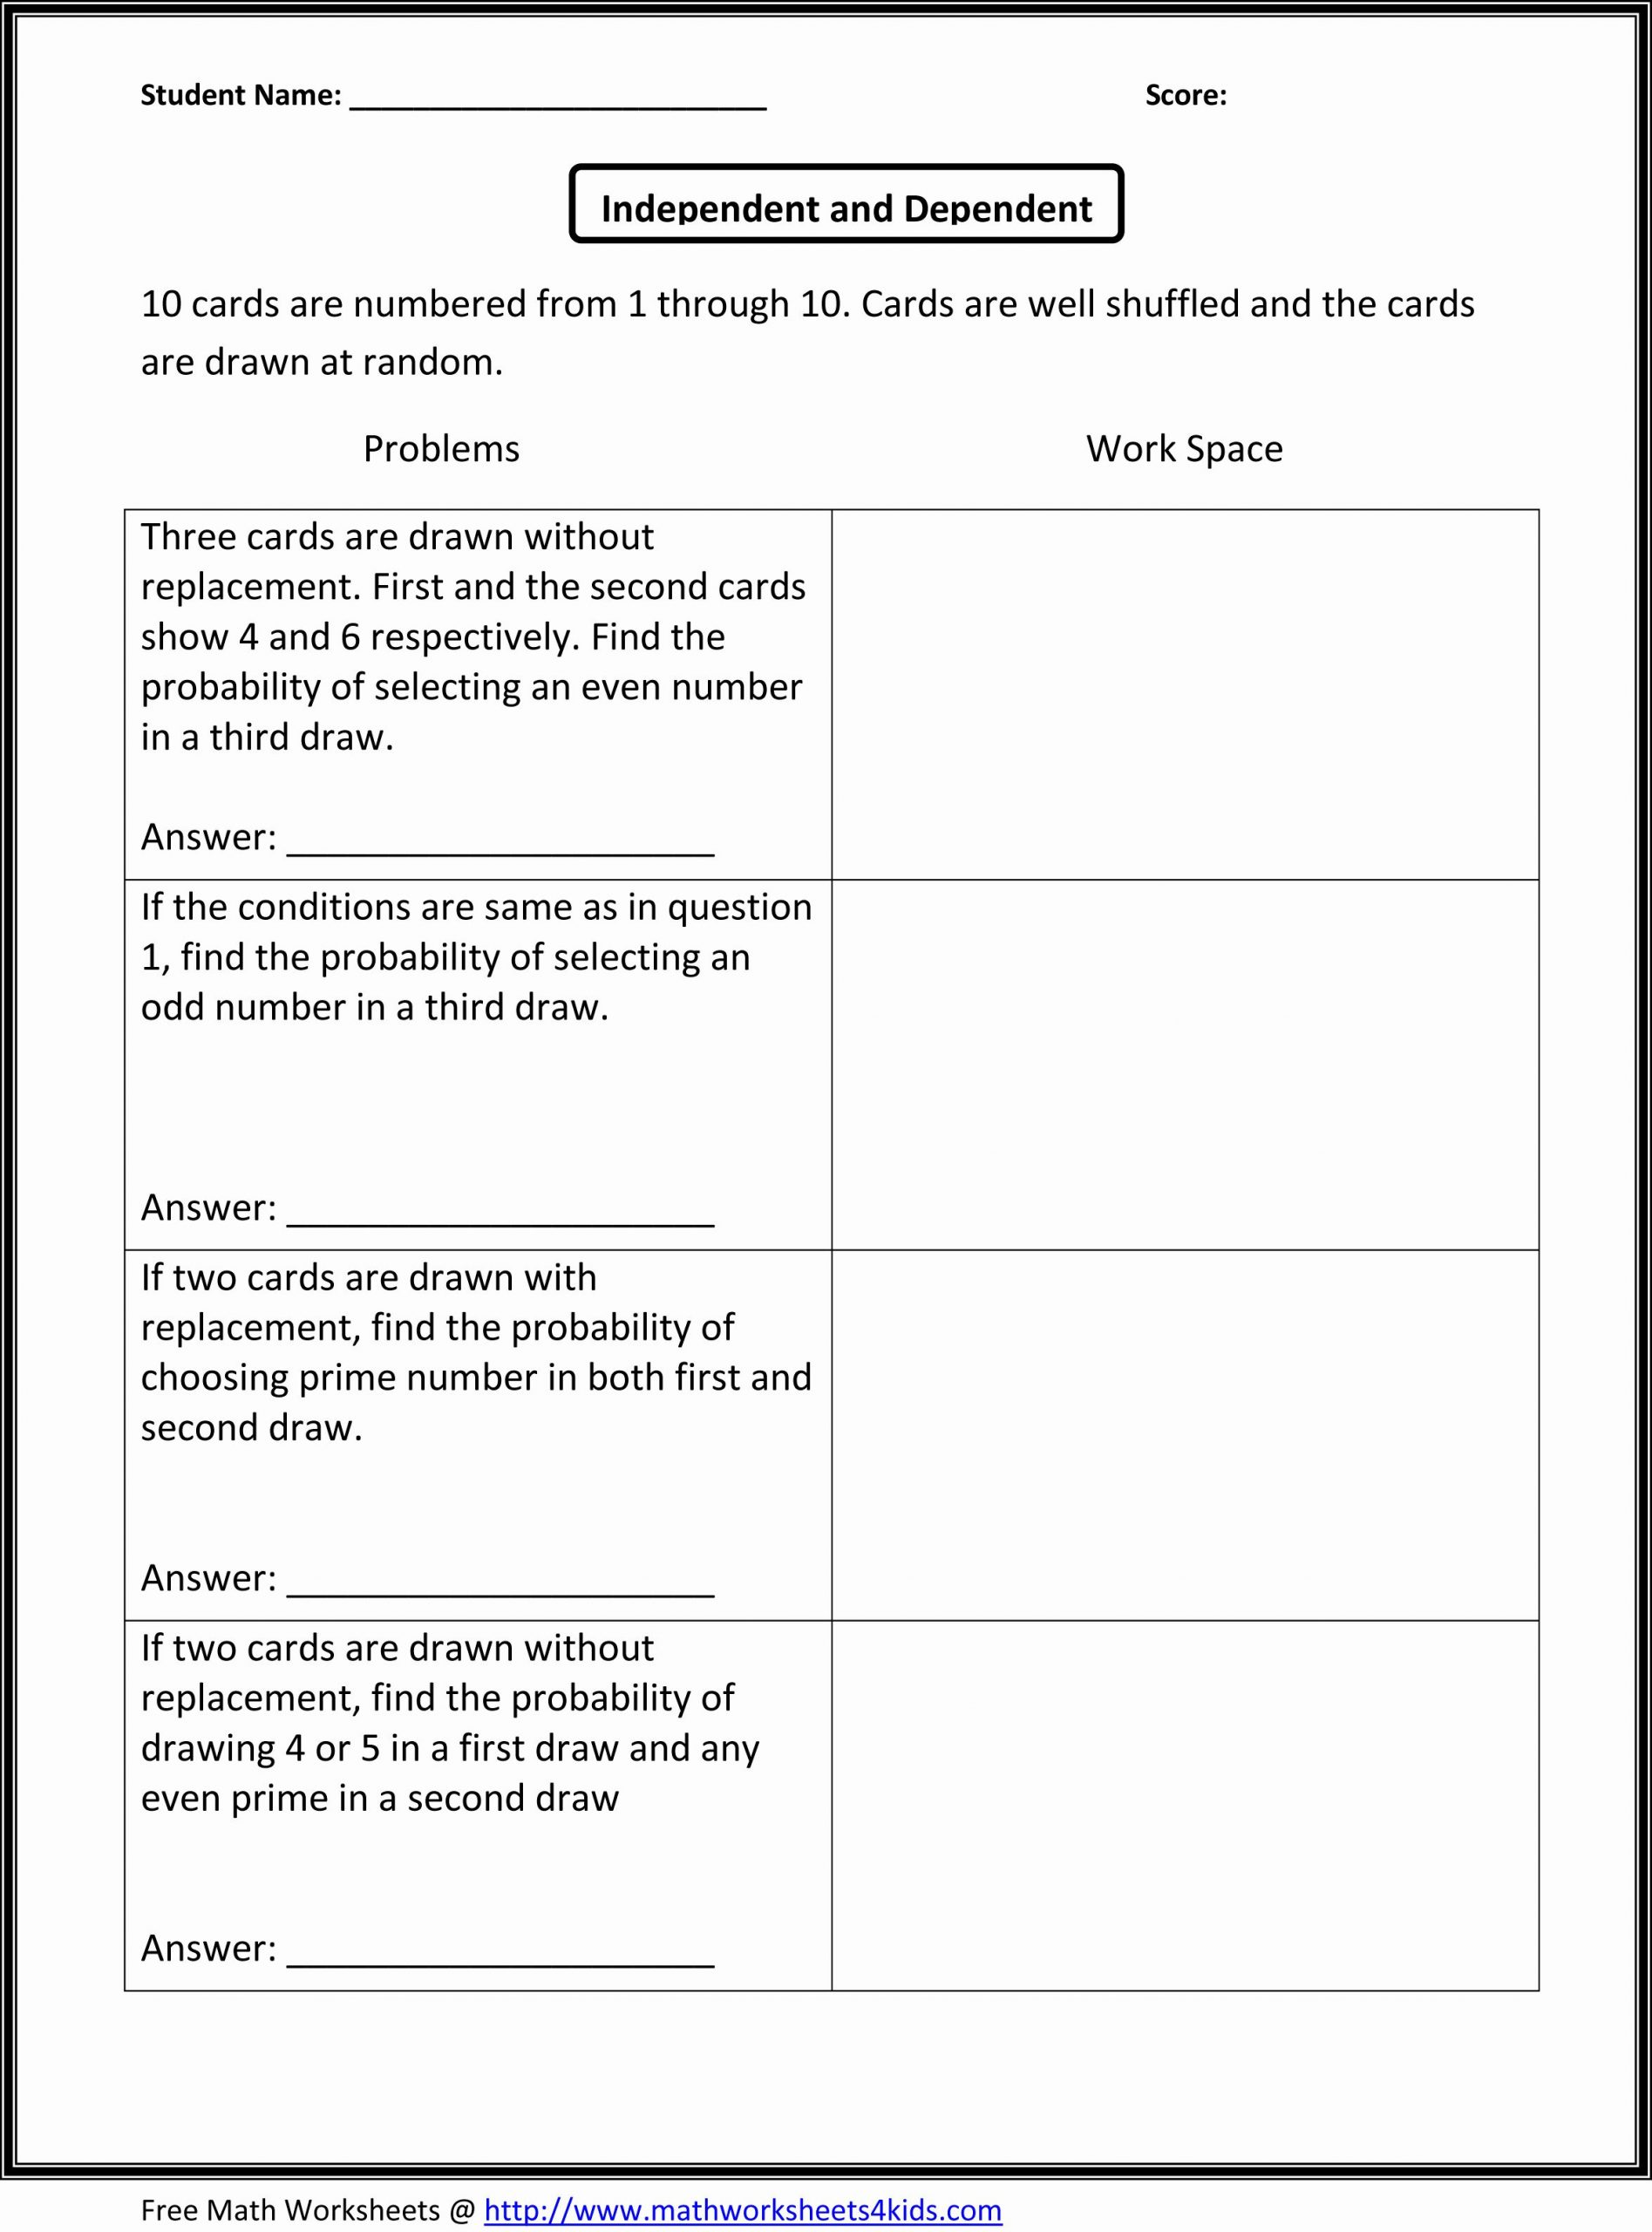 Identifying Variables Worksheet Answers Dependent and Independent Variables Worksheet with Answers